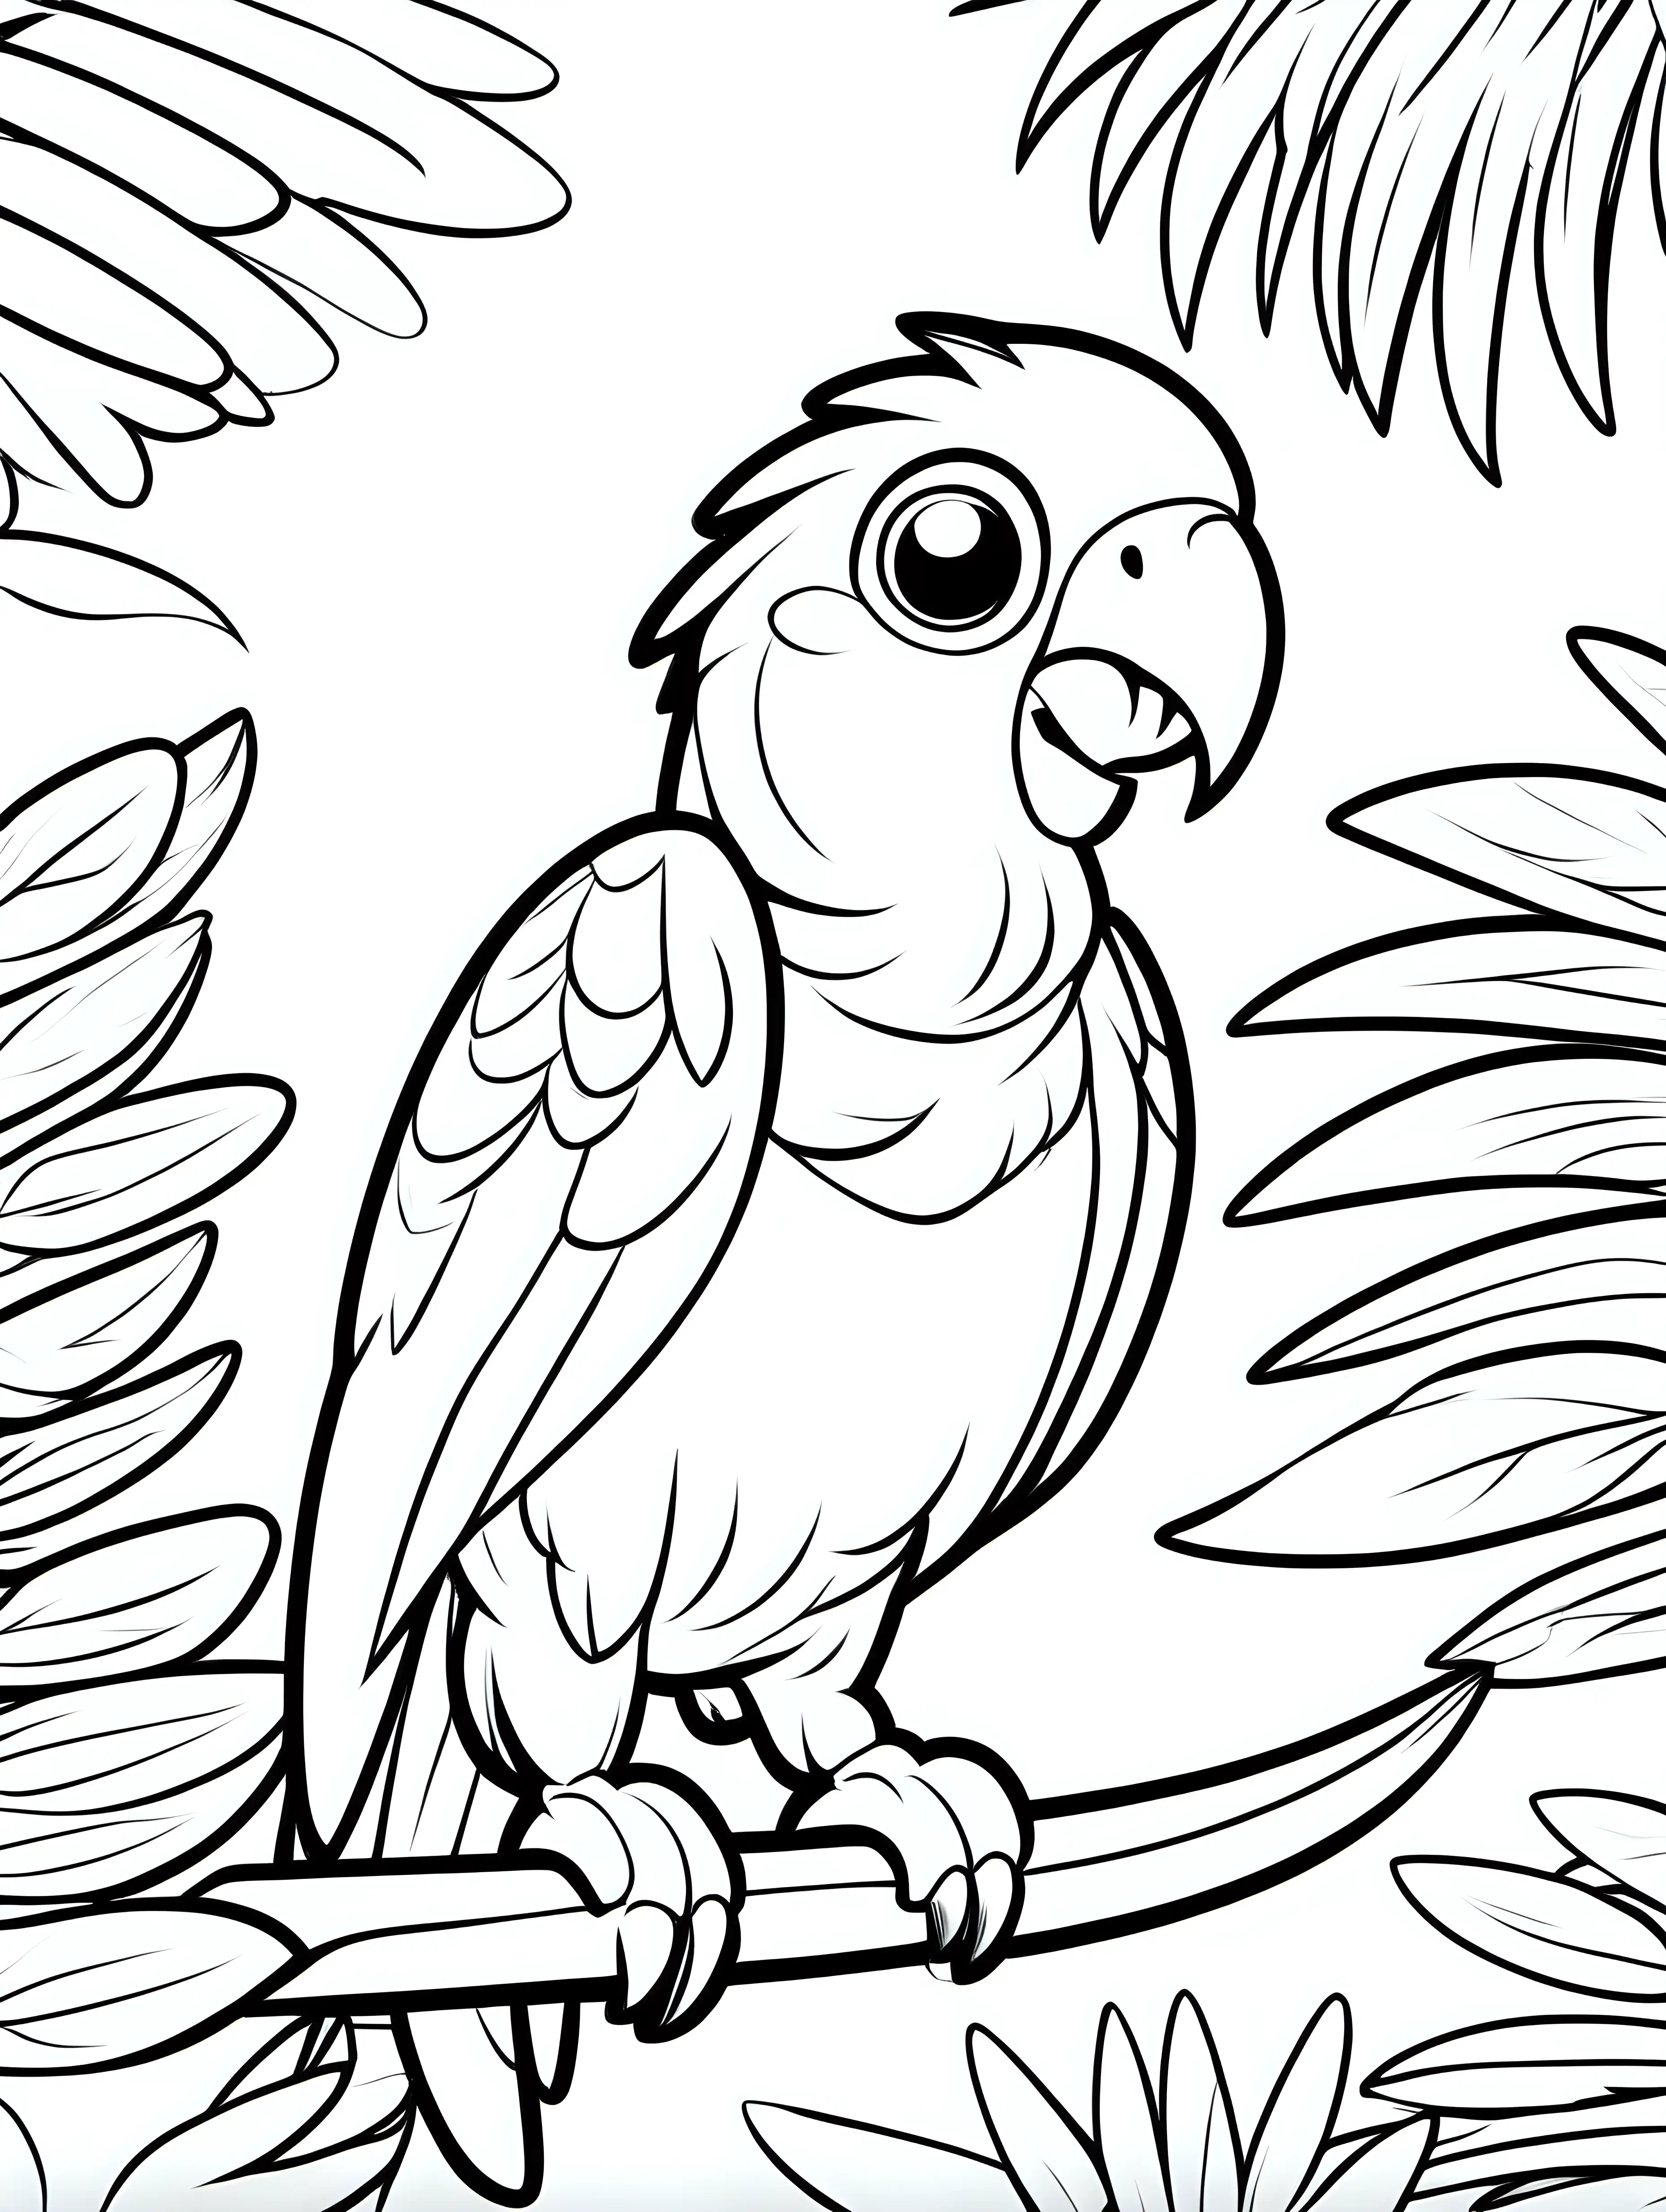 Adorable Cartoon Parrot Chick Perched on Vibrant Tree Branch